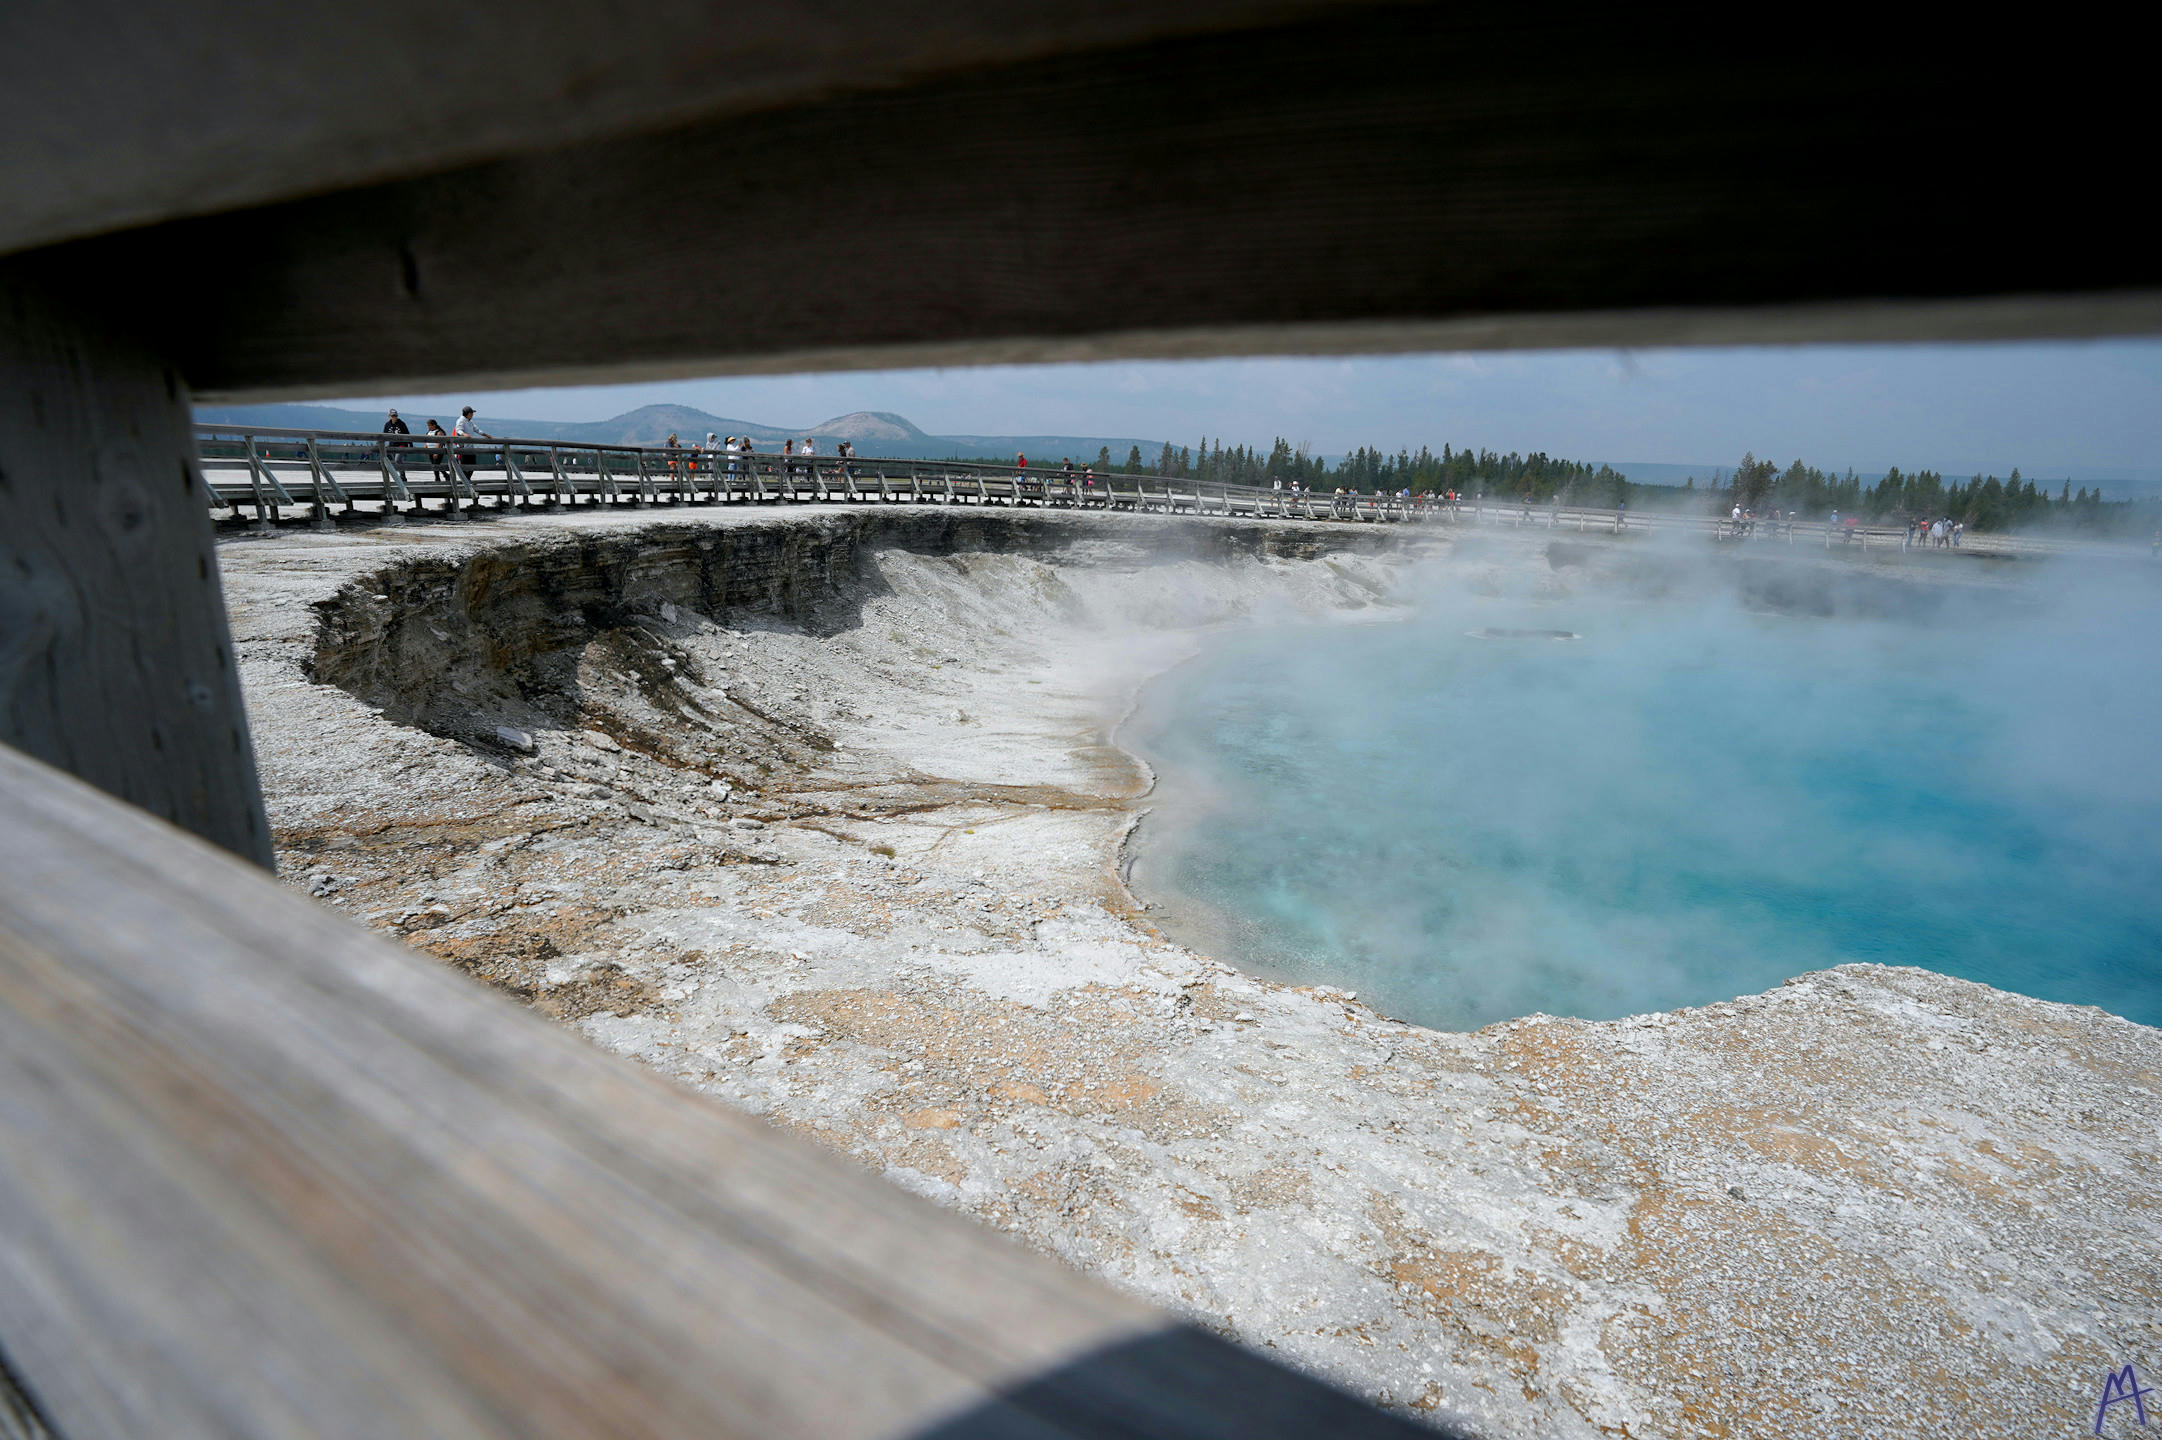 Very blue hot spring with steam at Yellowstone